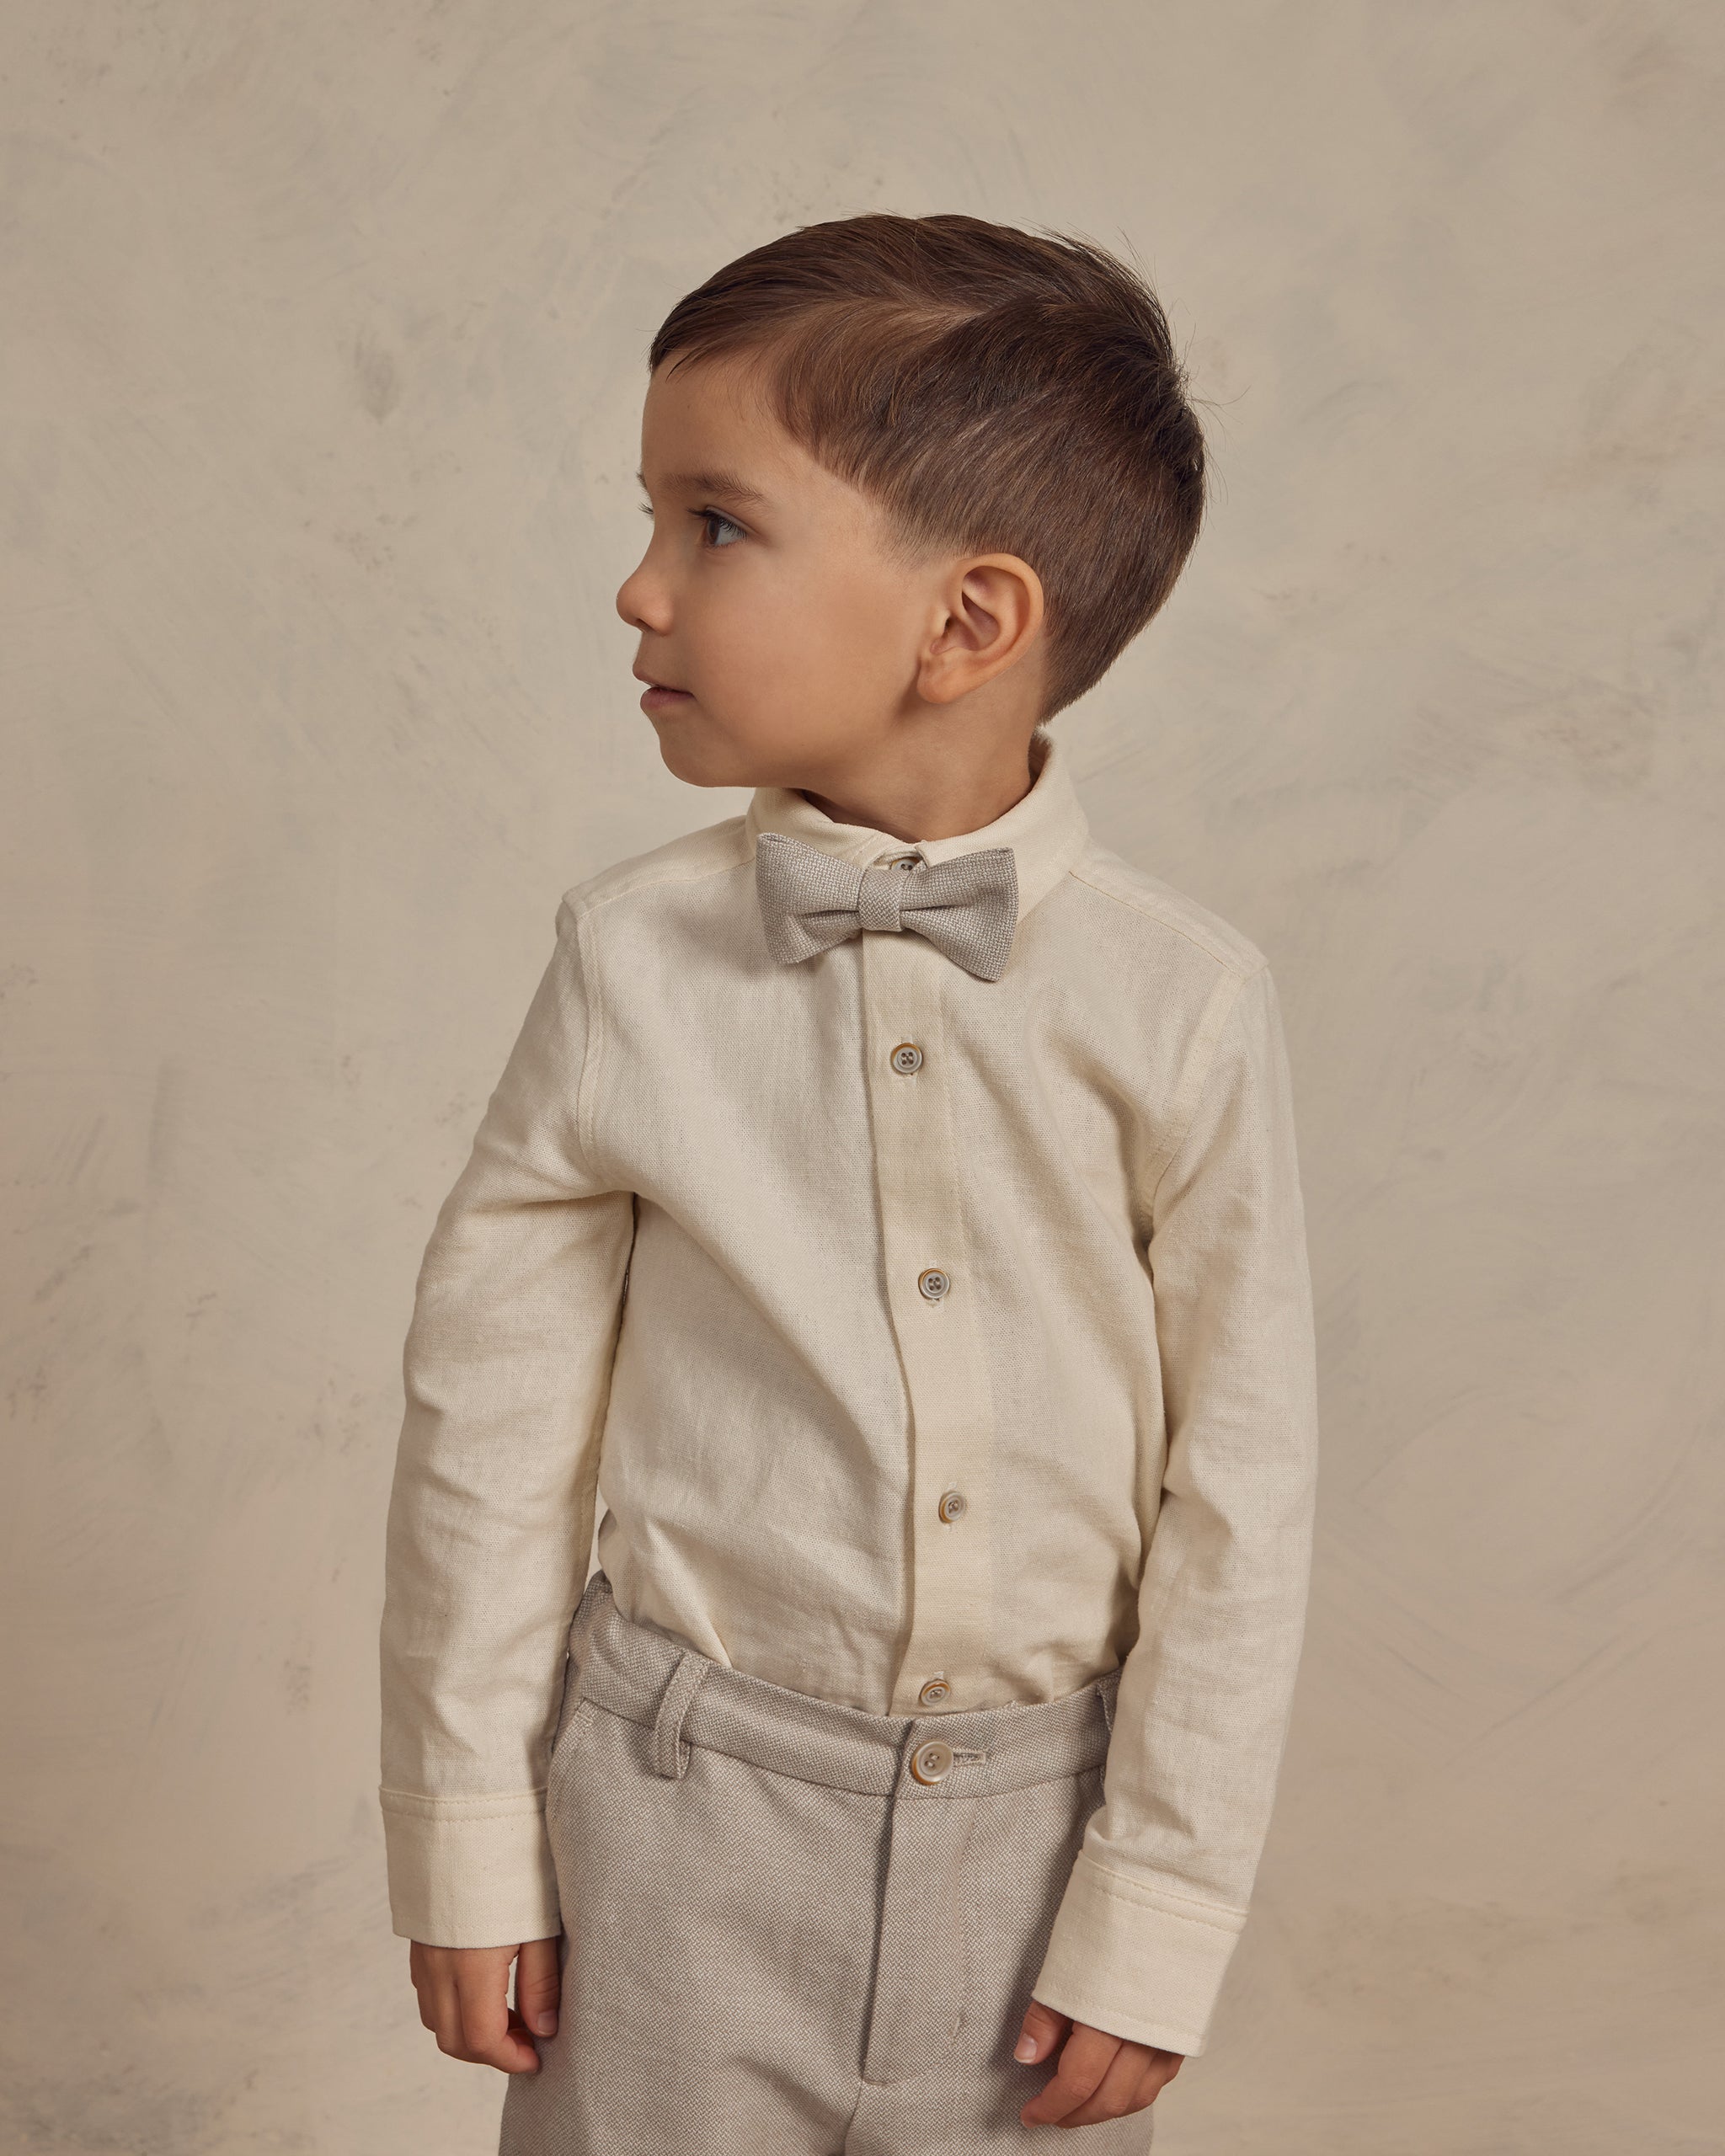 Bow Tie || Fog - Rylee + Cru | Kids Clothes | Trendy Baby Clothes | Modern Infant Outfits |